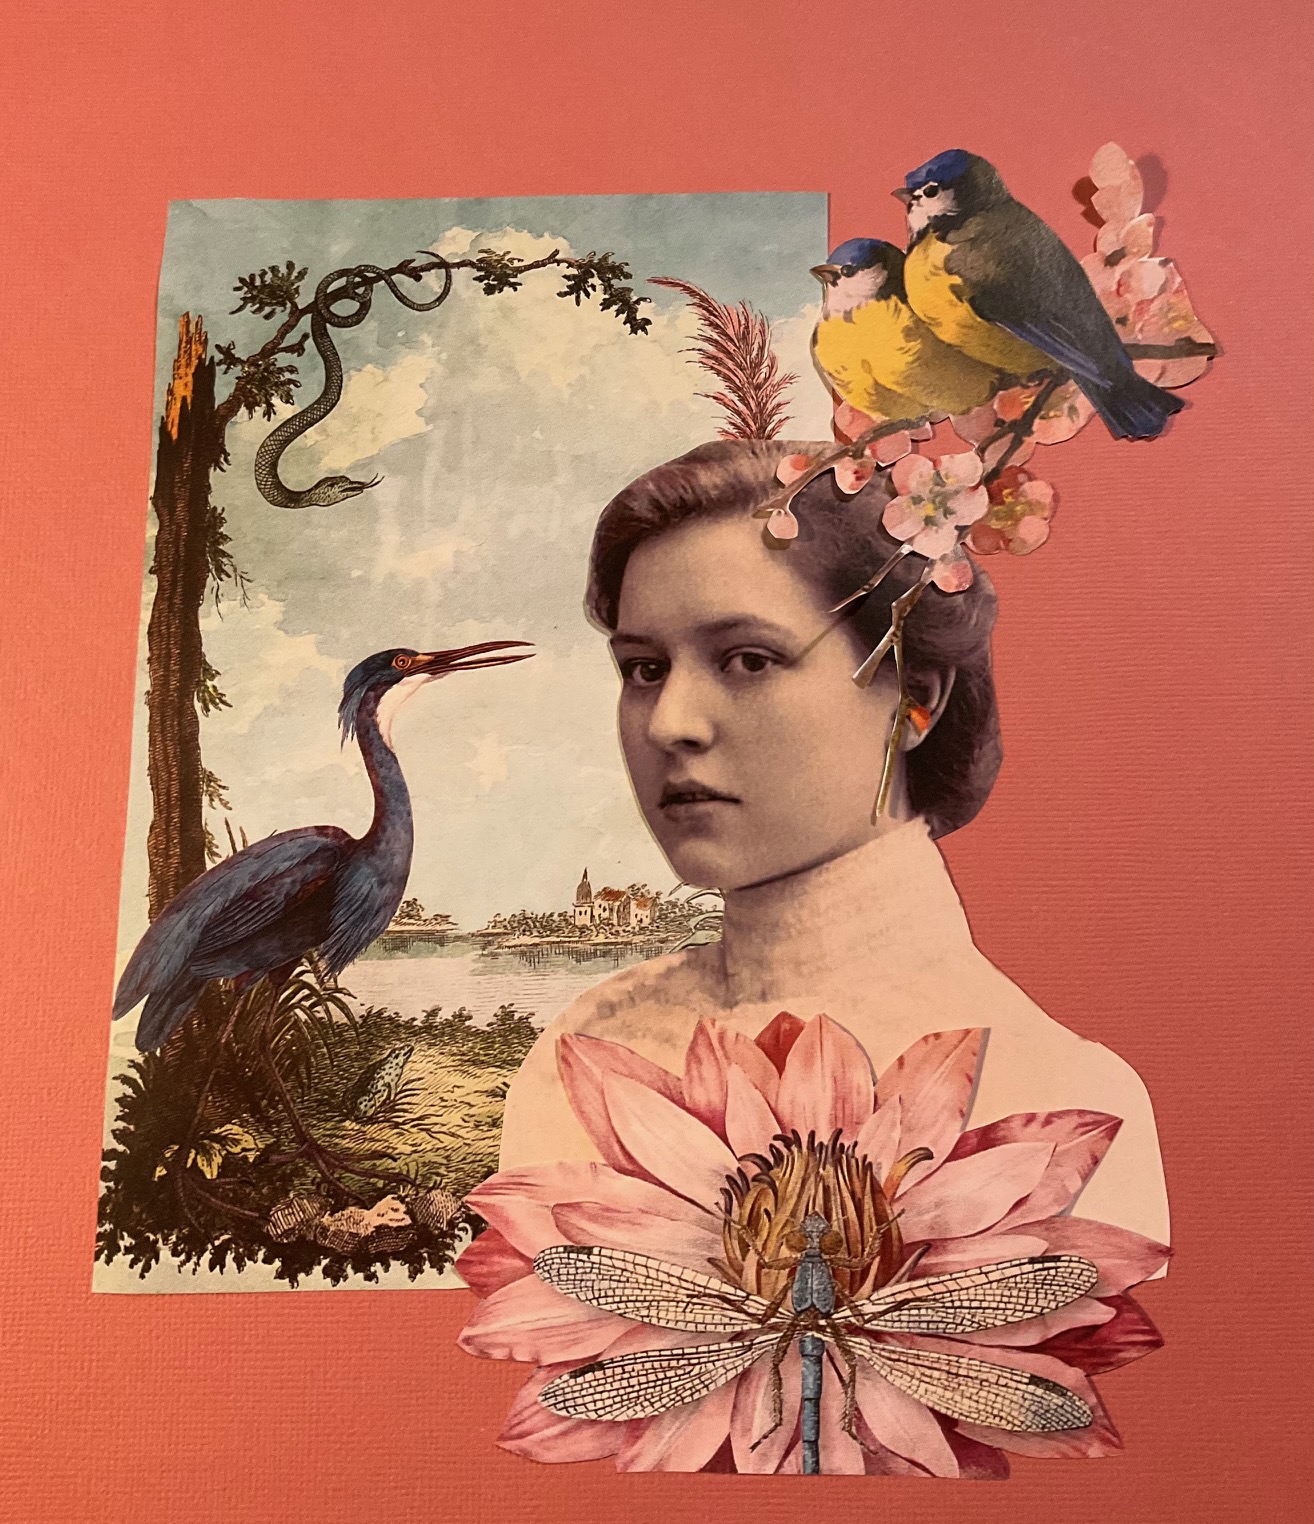 Collage inspiration by Lora Warman in her member's Artist Profile